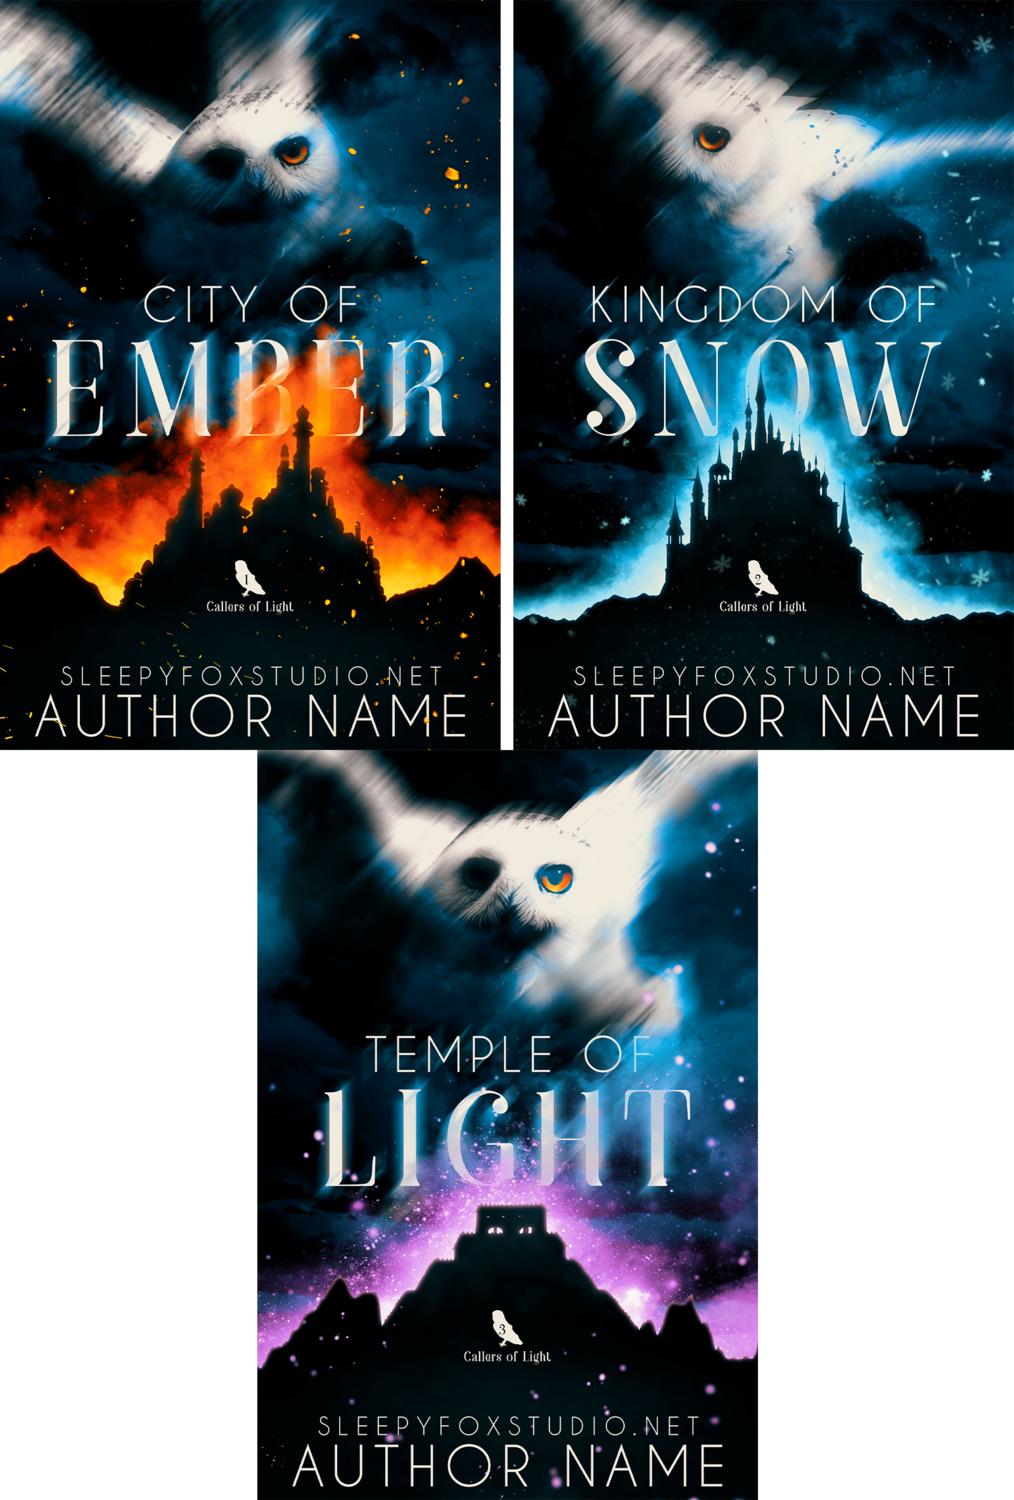 Callers of Light trilogy